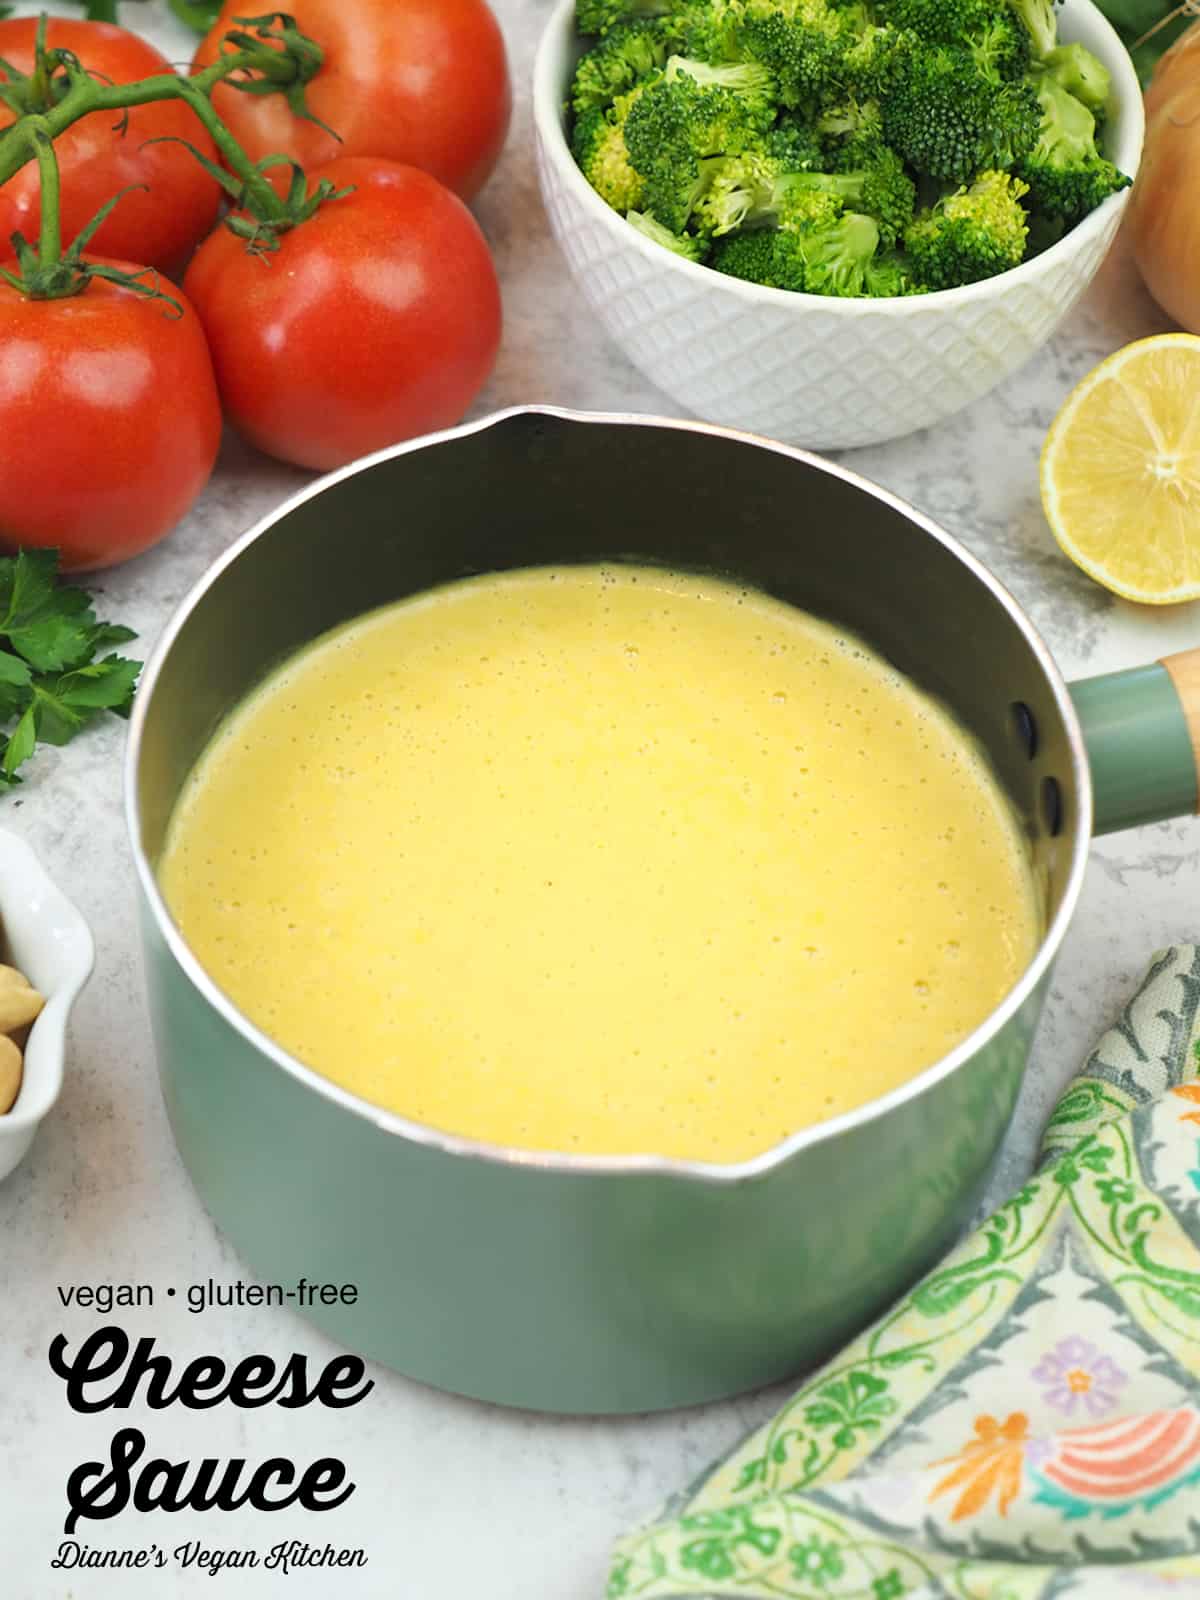 Vegan Cheese Sauce with text overlay 